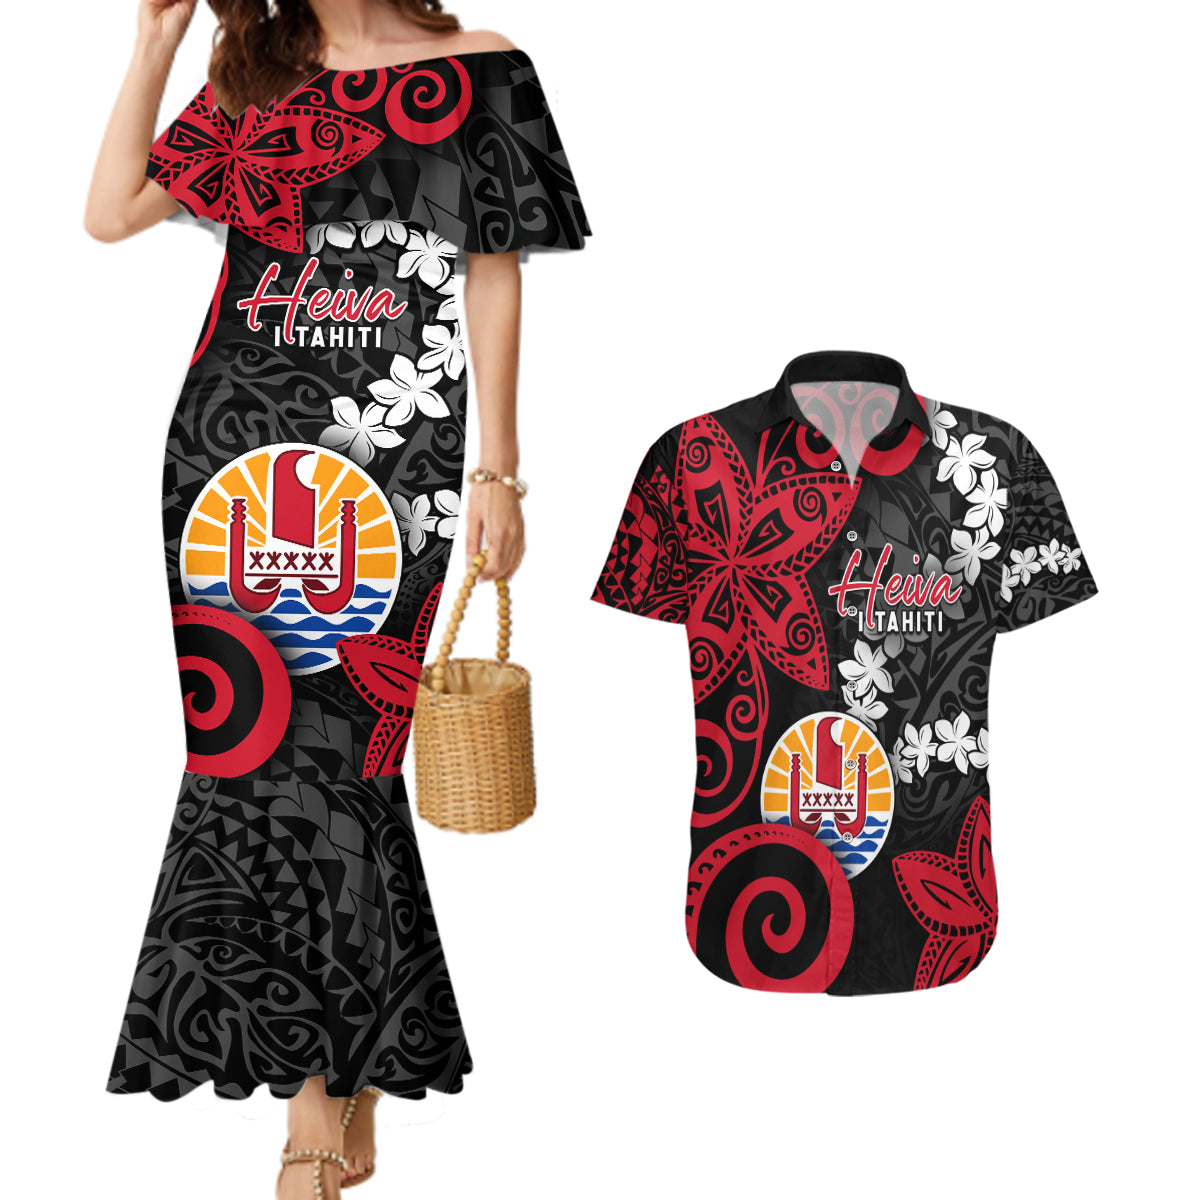 Tahiti Heiva Festival Couples Matching Mermaid Dress and Hawaiian Shirt Floral Pattern With Coat Of Arms